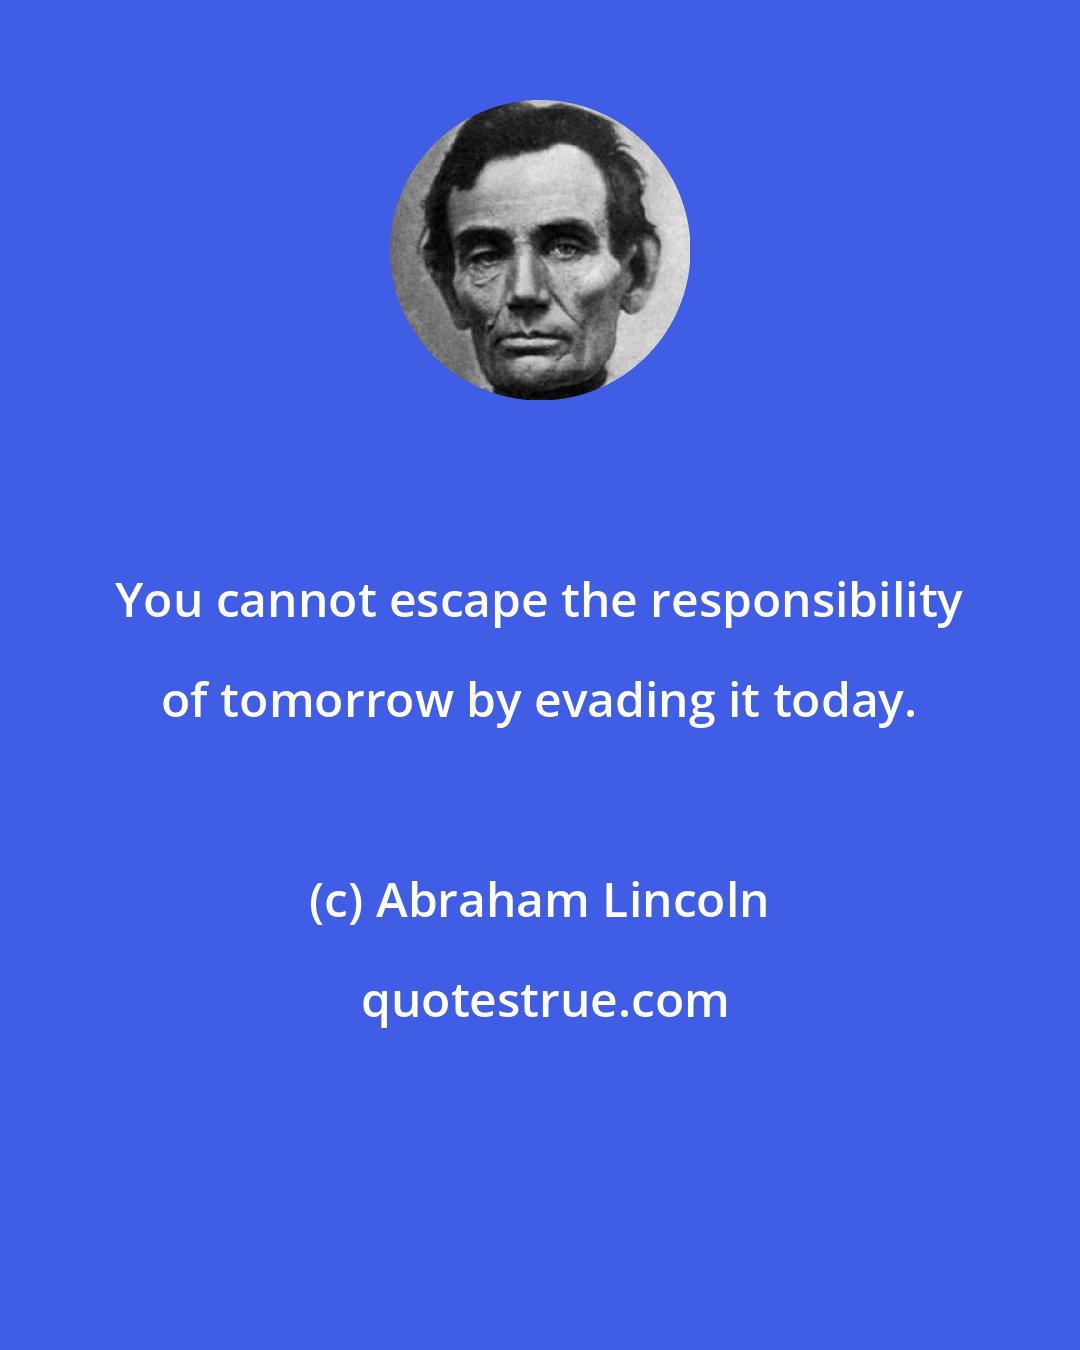 Abraham Lincoln: You cannot escape the responsibility of tomorrow by evading it today.